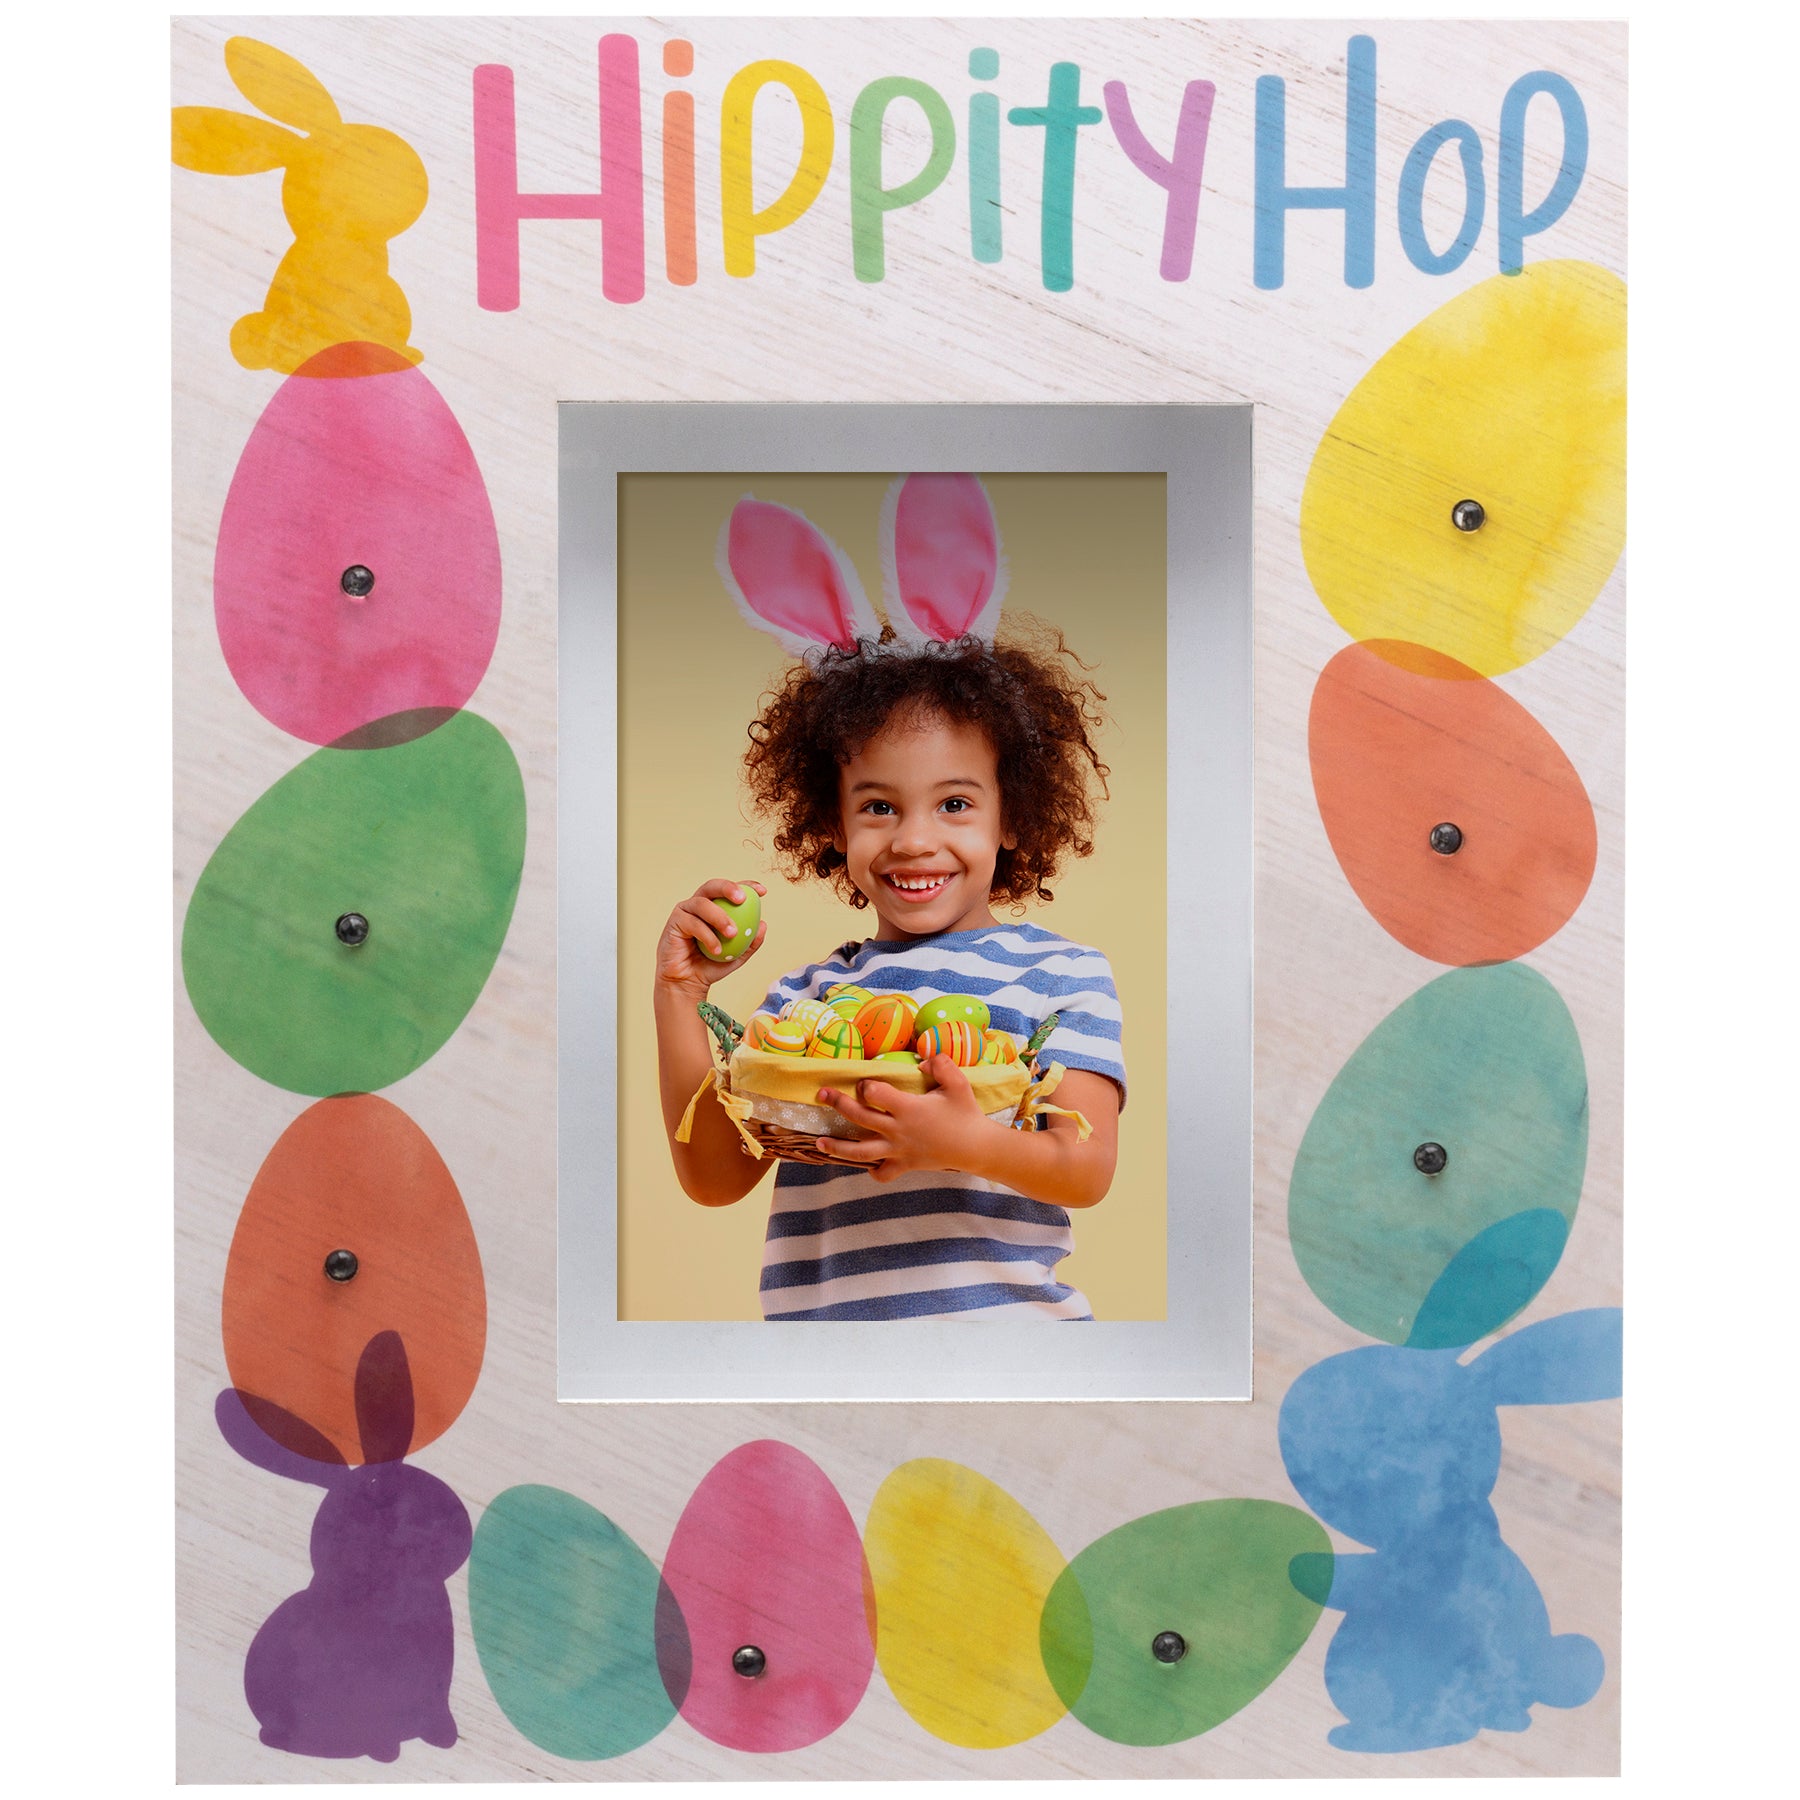 Hippity Hop Easter Shadow Box Frame with Lights